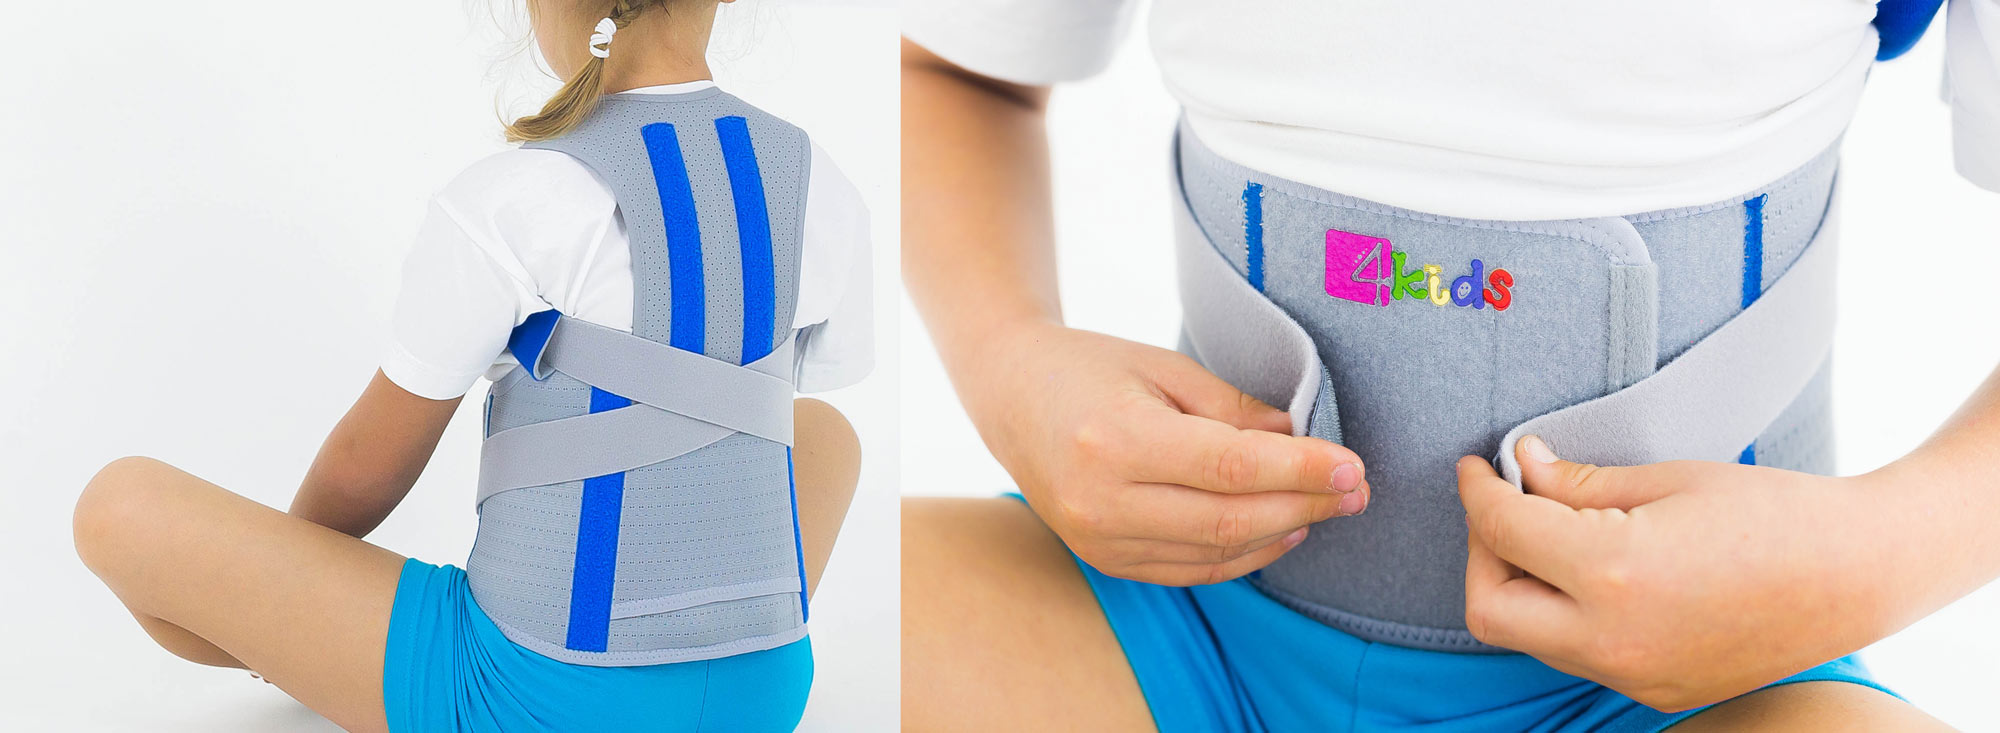 Back support and posture corrector 2 in 1 AM-WSP-06